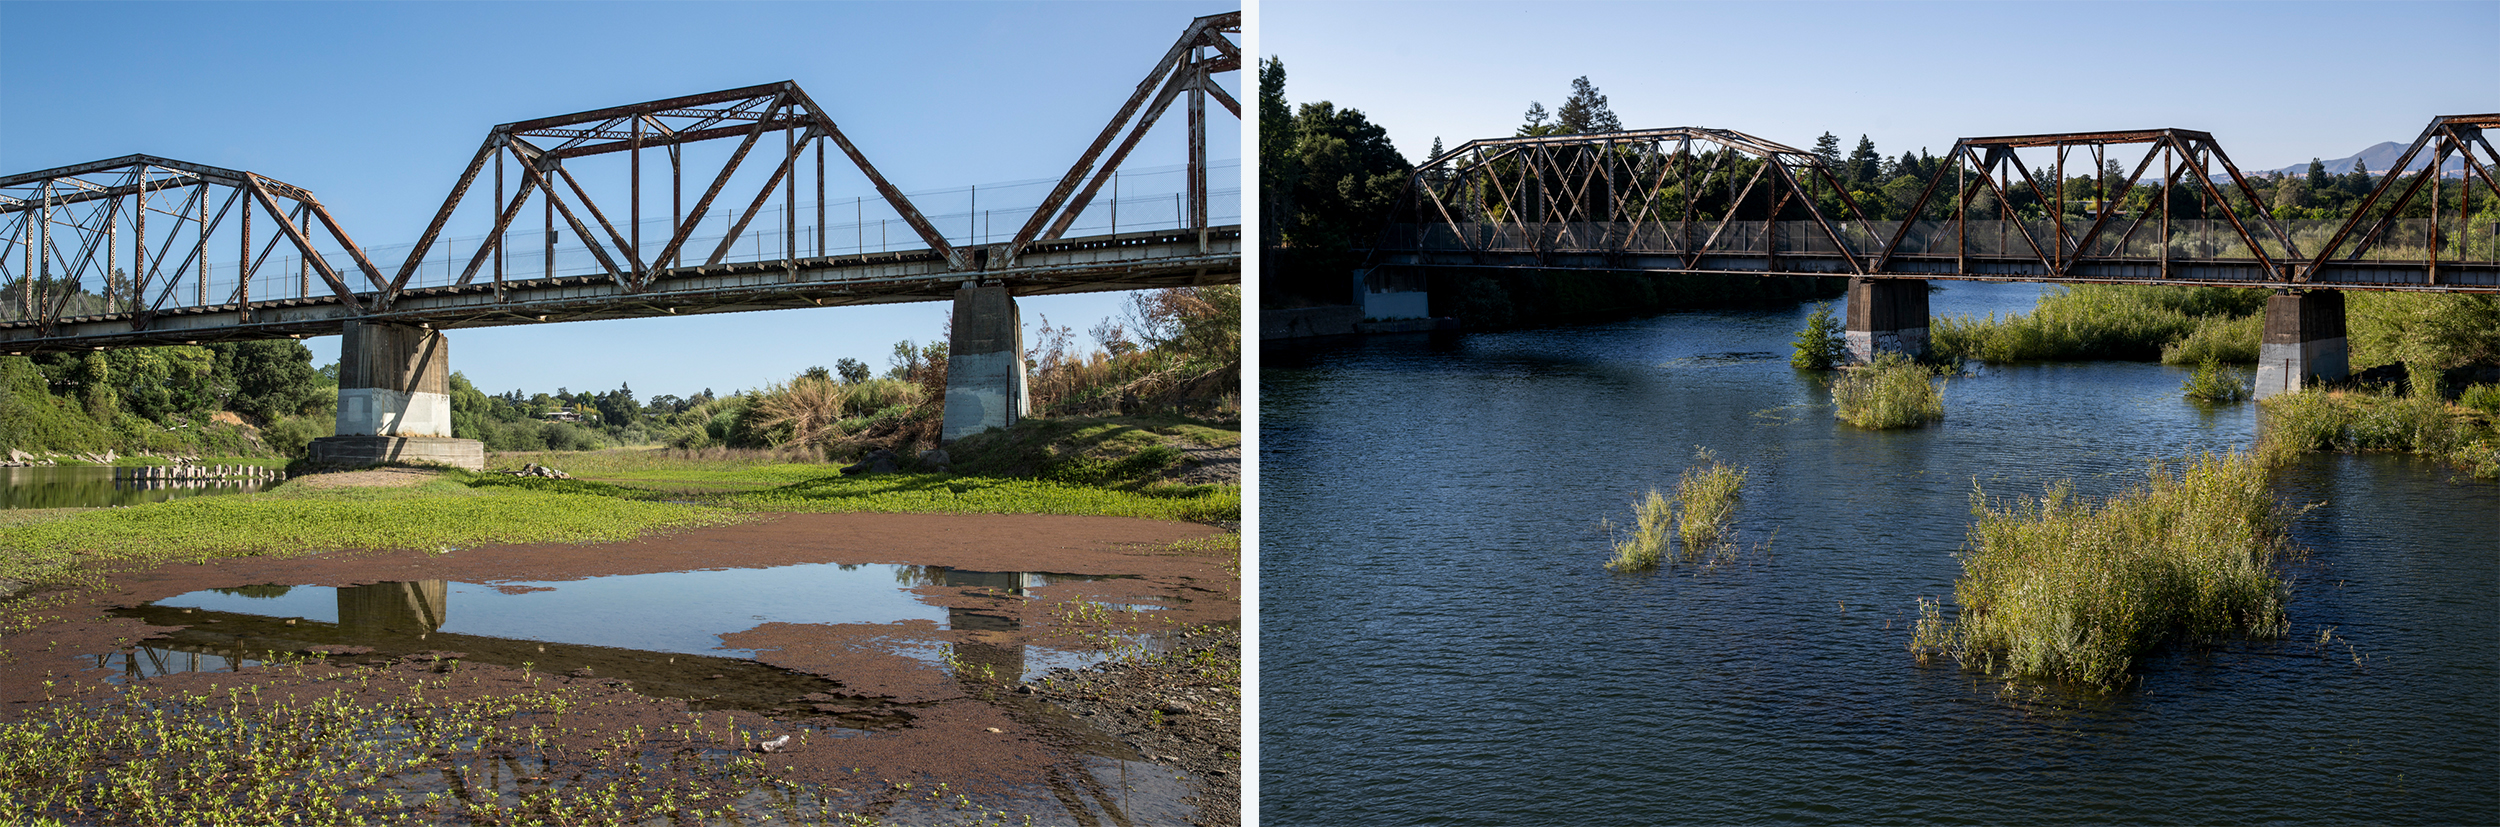 Two photos of the same iron bridge at different moments in time. On the left, there are standing pools of water in the river bed. On the right, the banks of the river brim with flowing water.